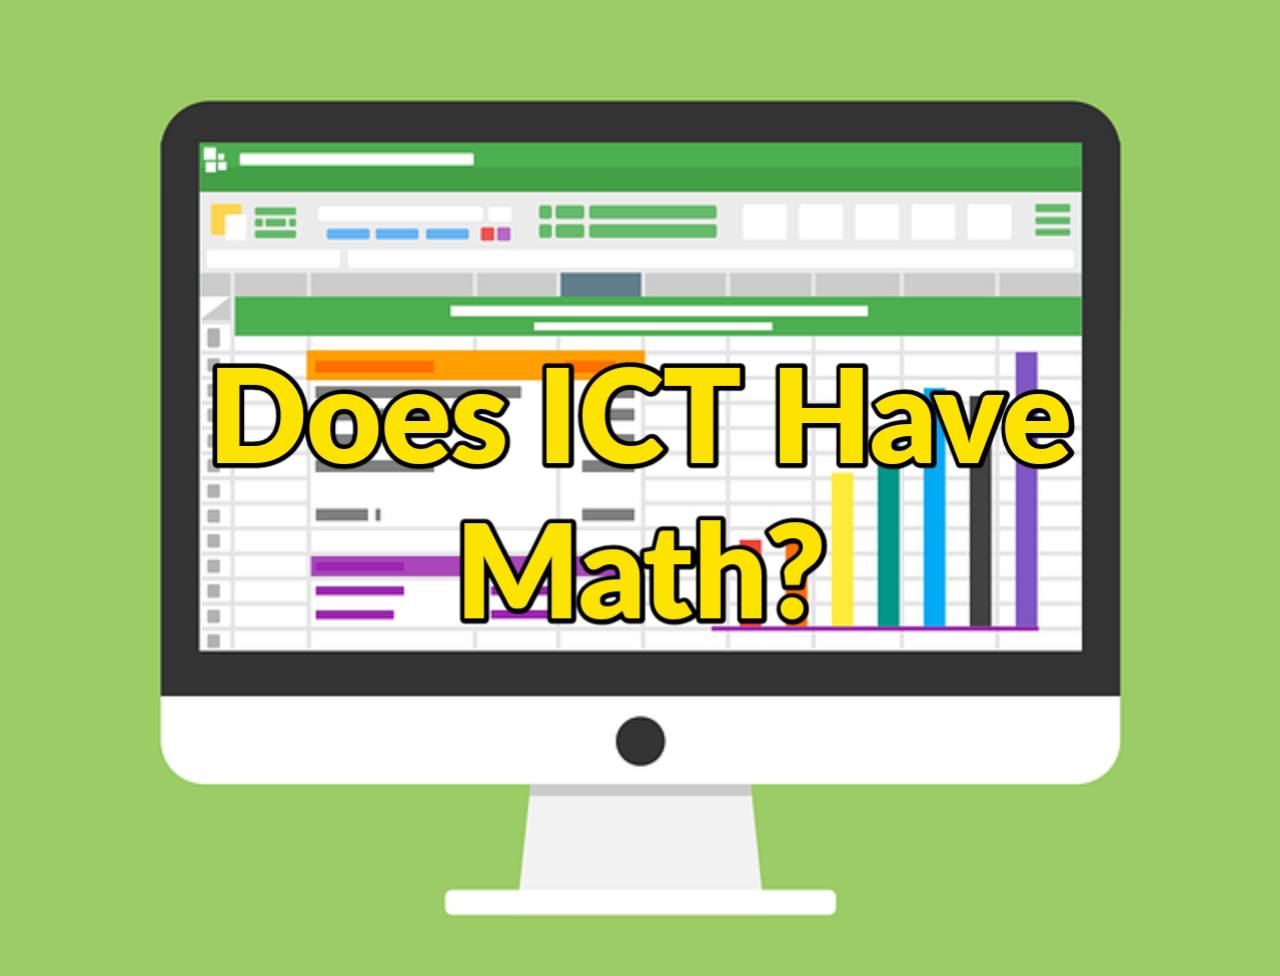 Does ICT Have Math